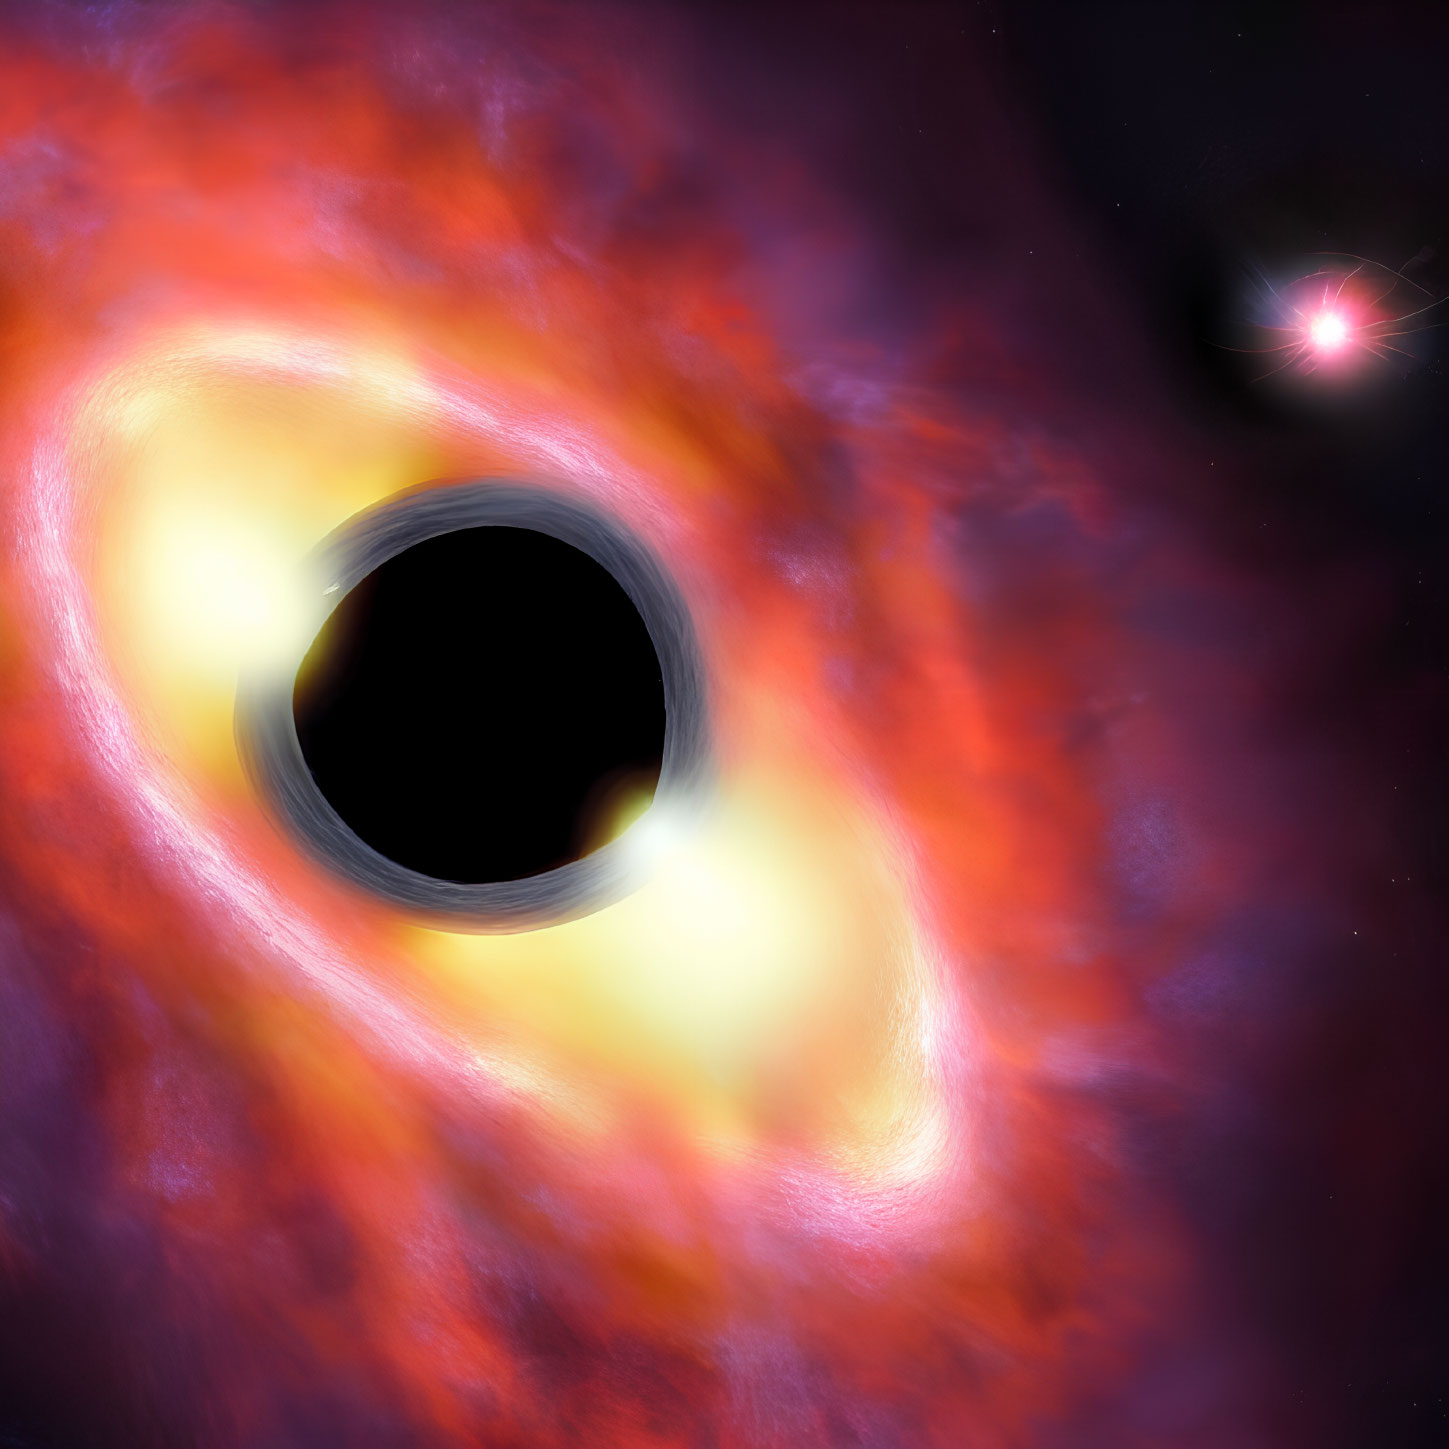 Detailed depiction of black hole with accretion disk in red and purple cosmic scene